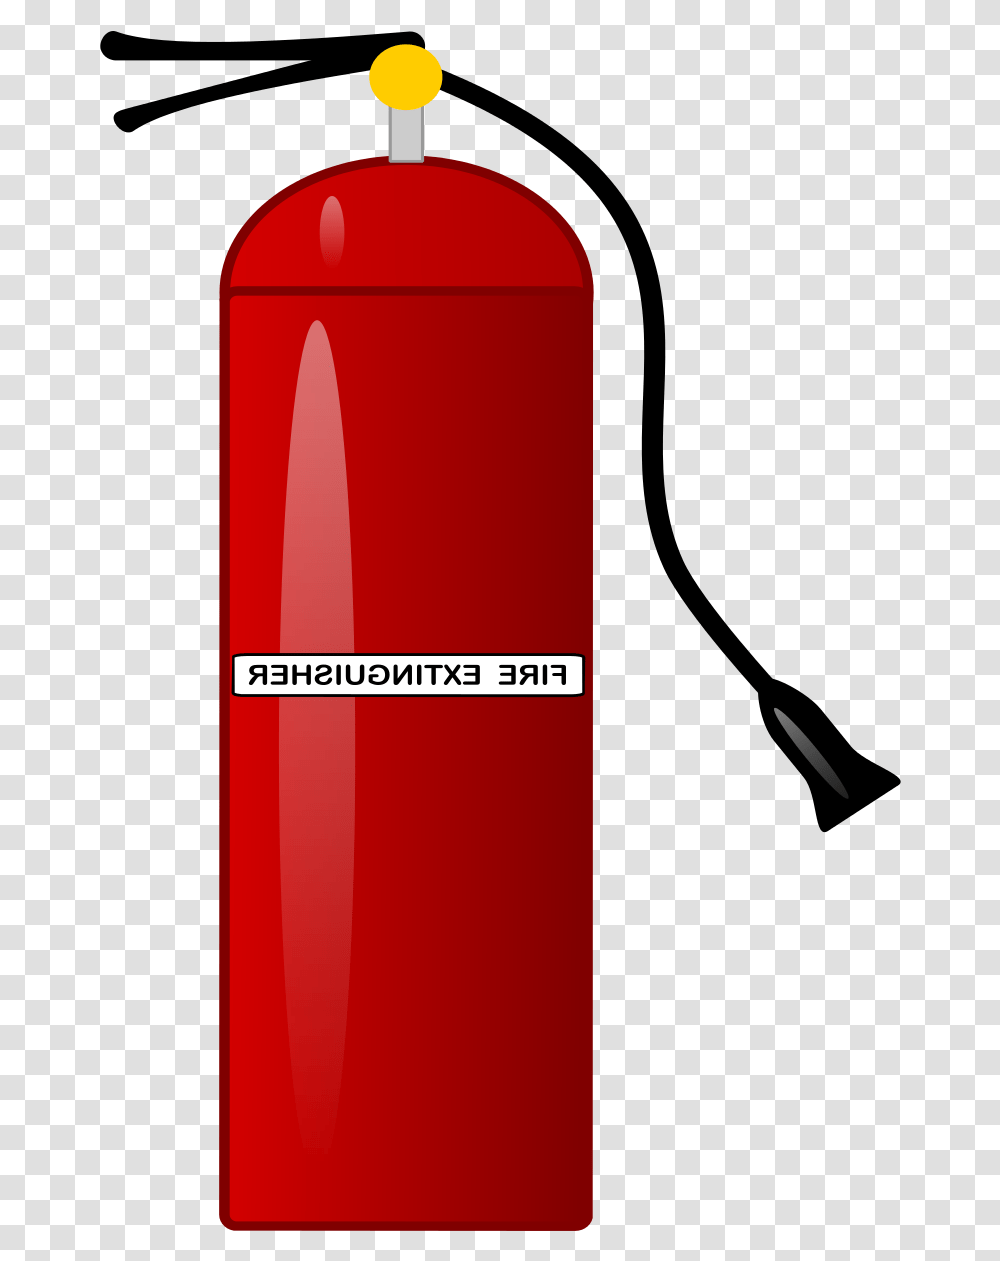 Download Stock Alarm Cliparthot Of And Fire Fire Extinguisher Clipart, Bottle, Gas Pump, Machine, Beverage Transparent Png